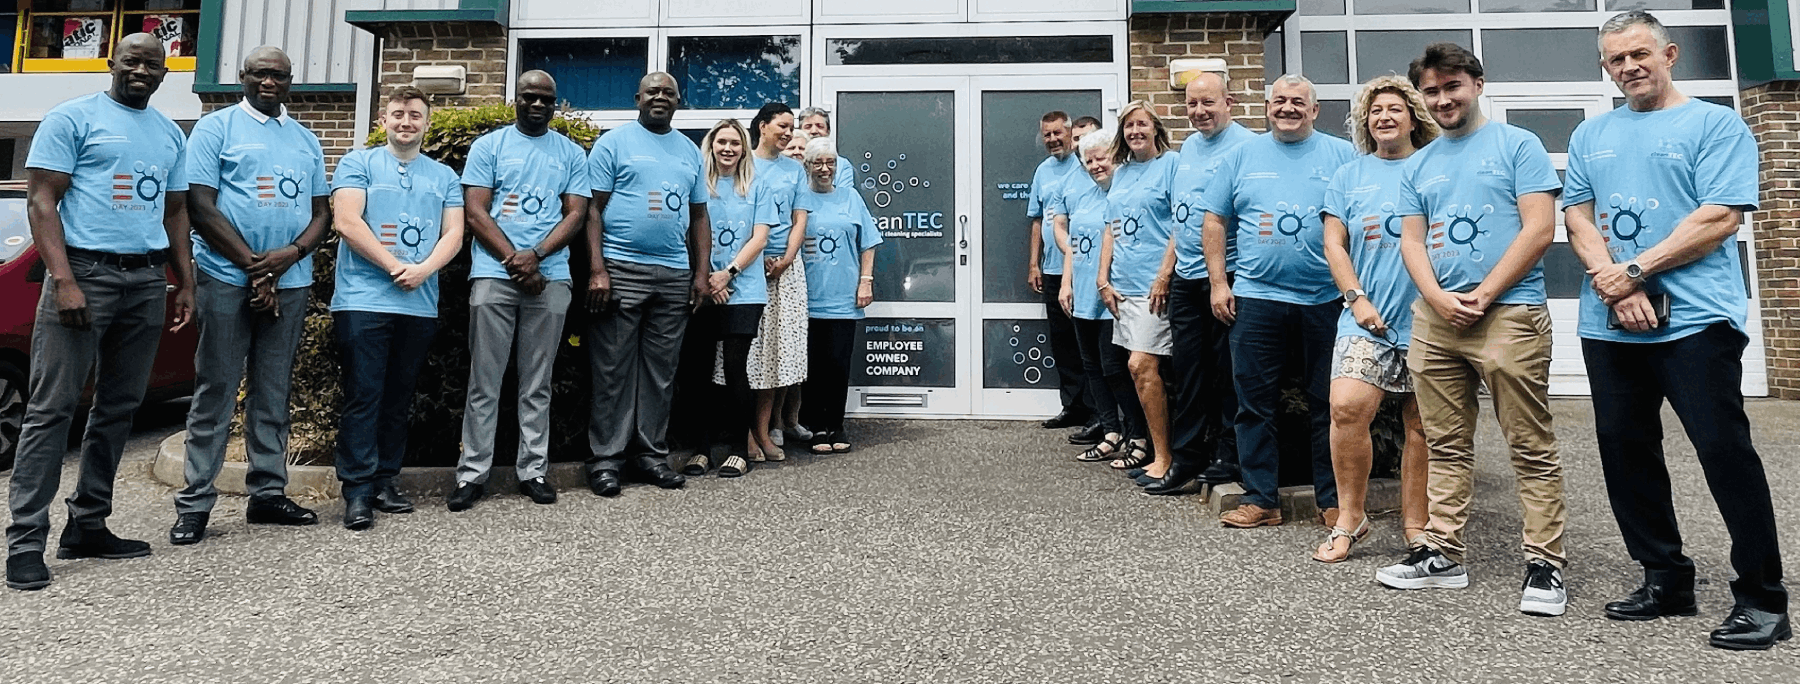 CleanTEC team outside their office in Watford